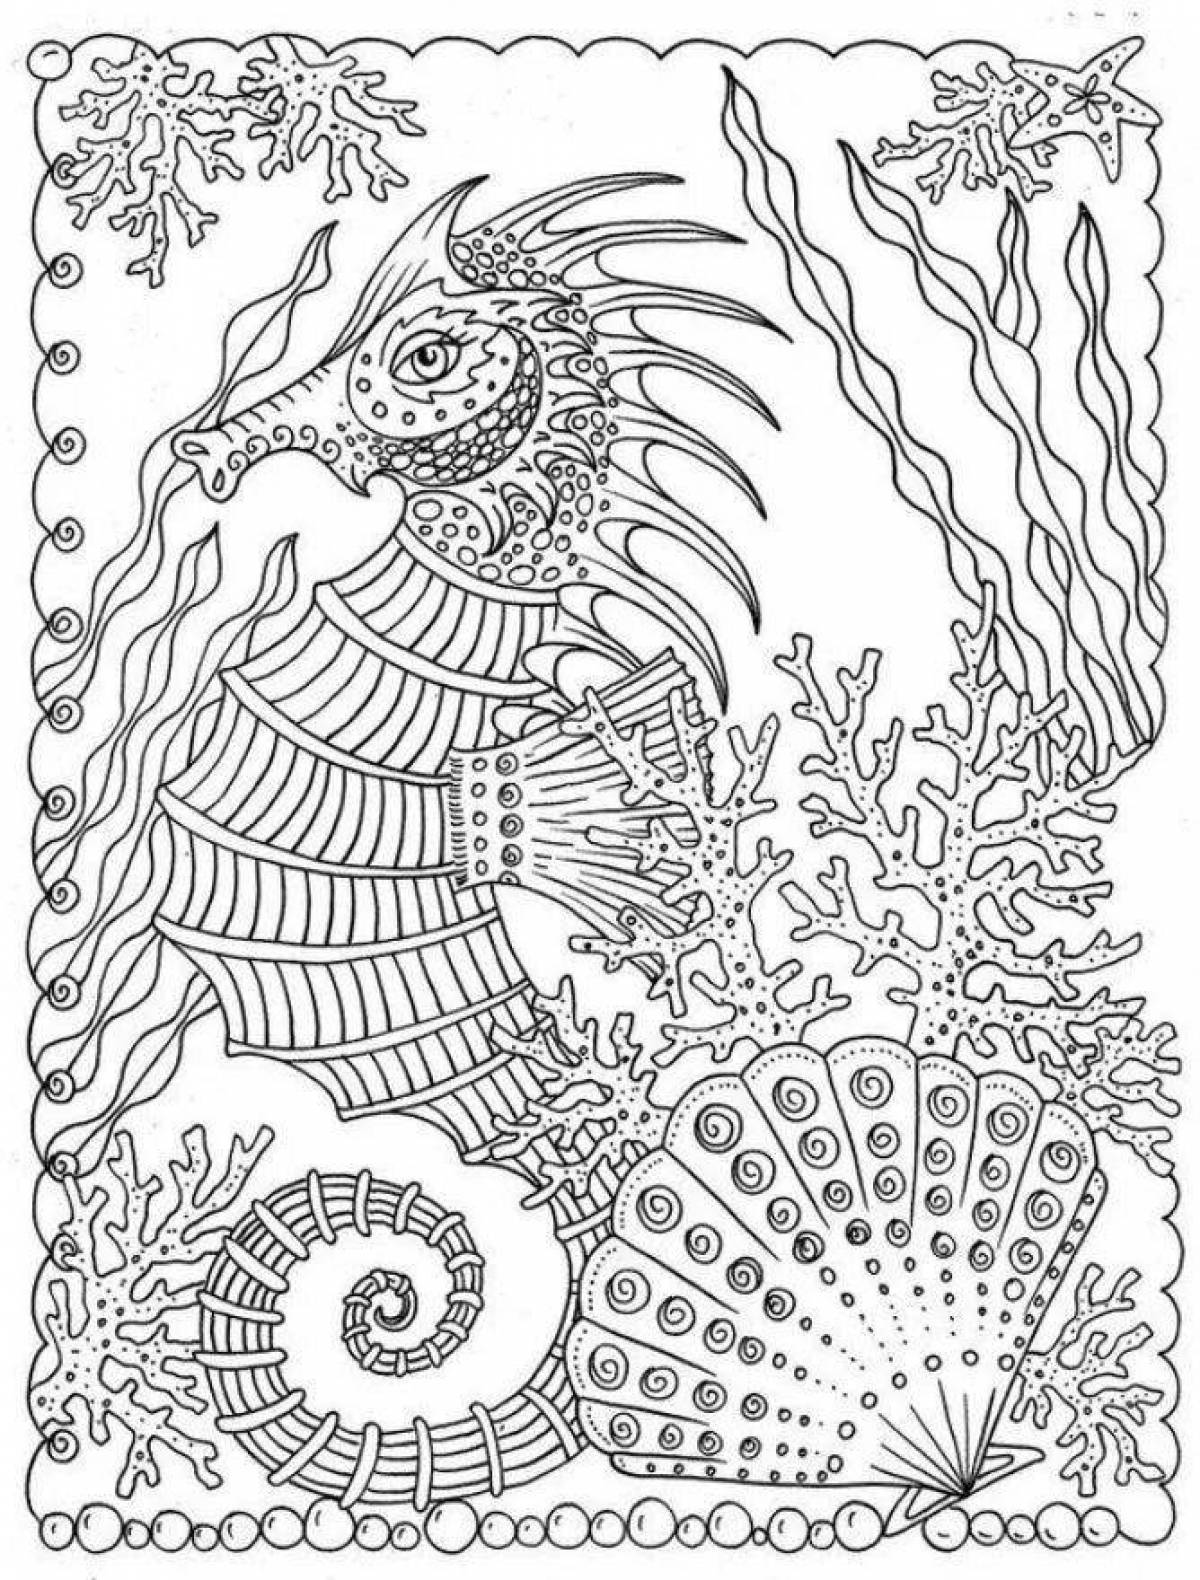 Soothing coloring book antistress sea